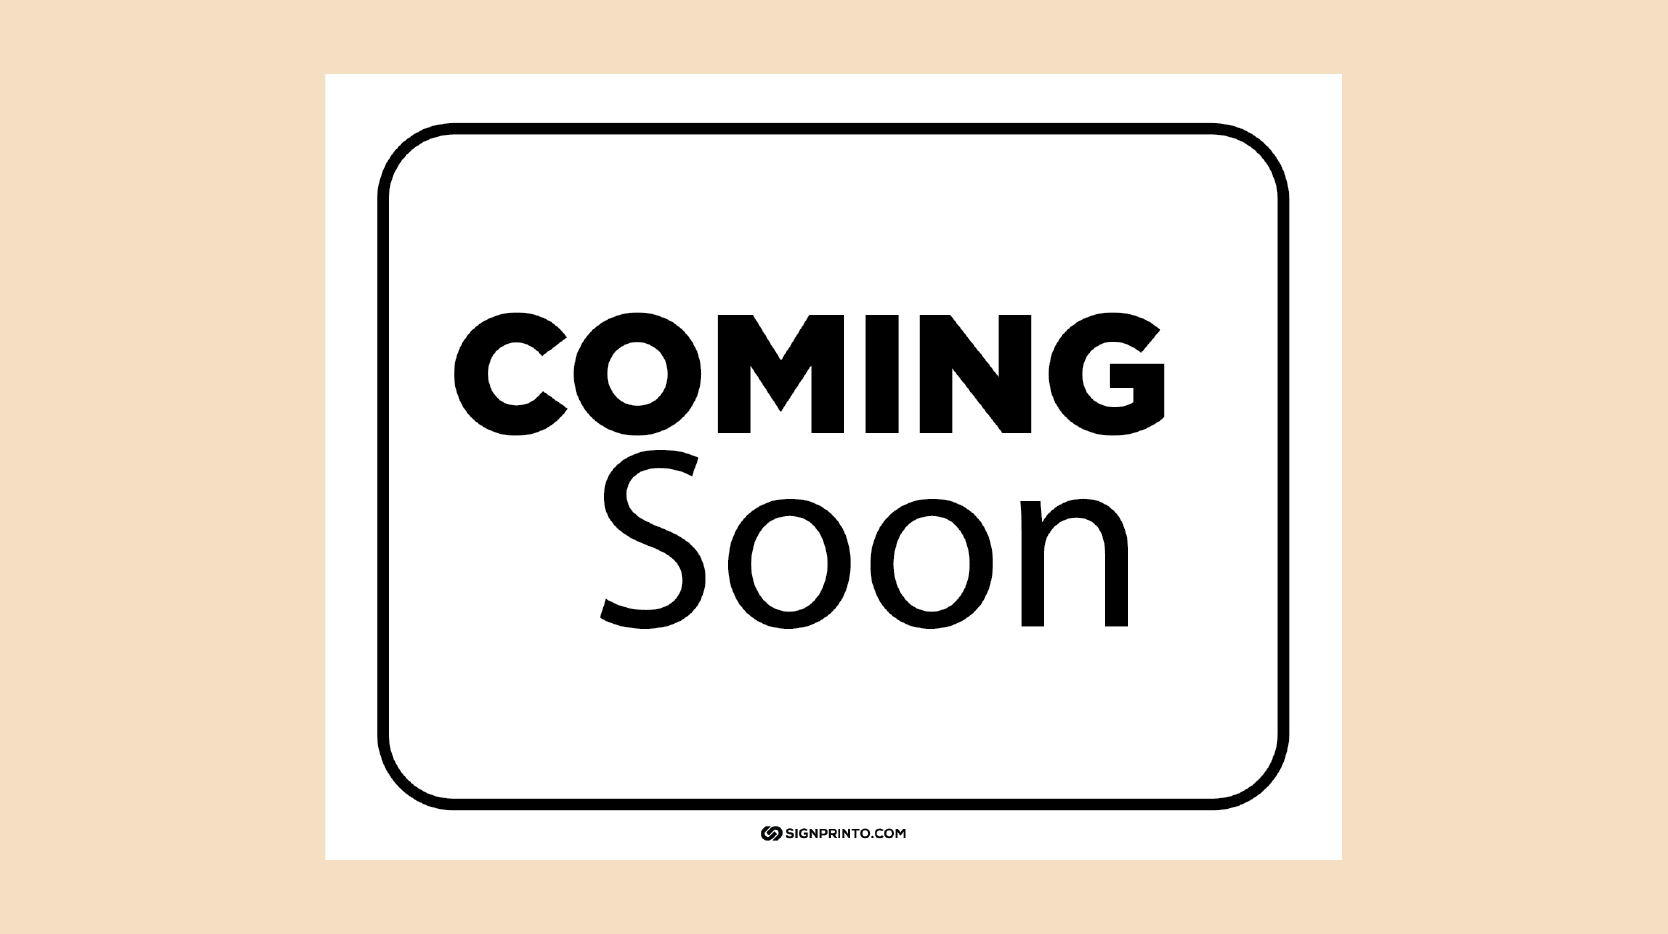 Coming Soon Sign